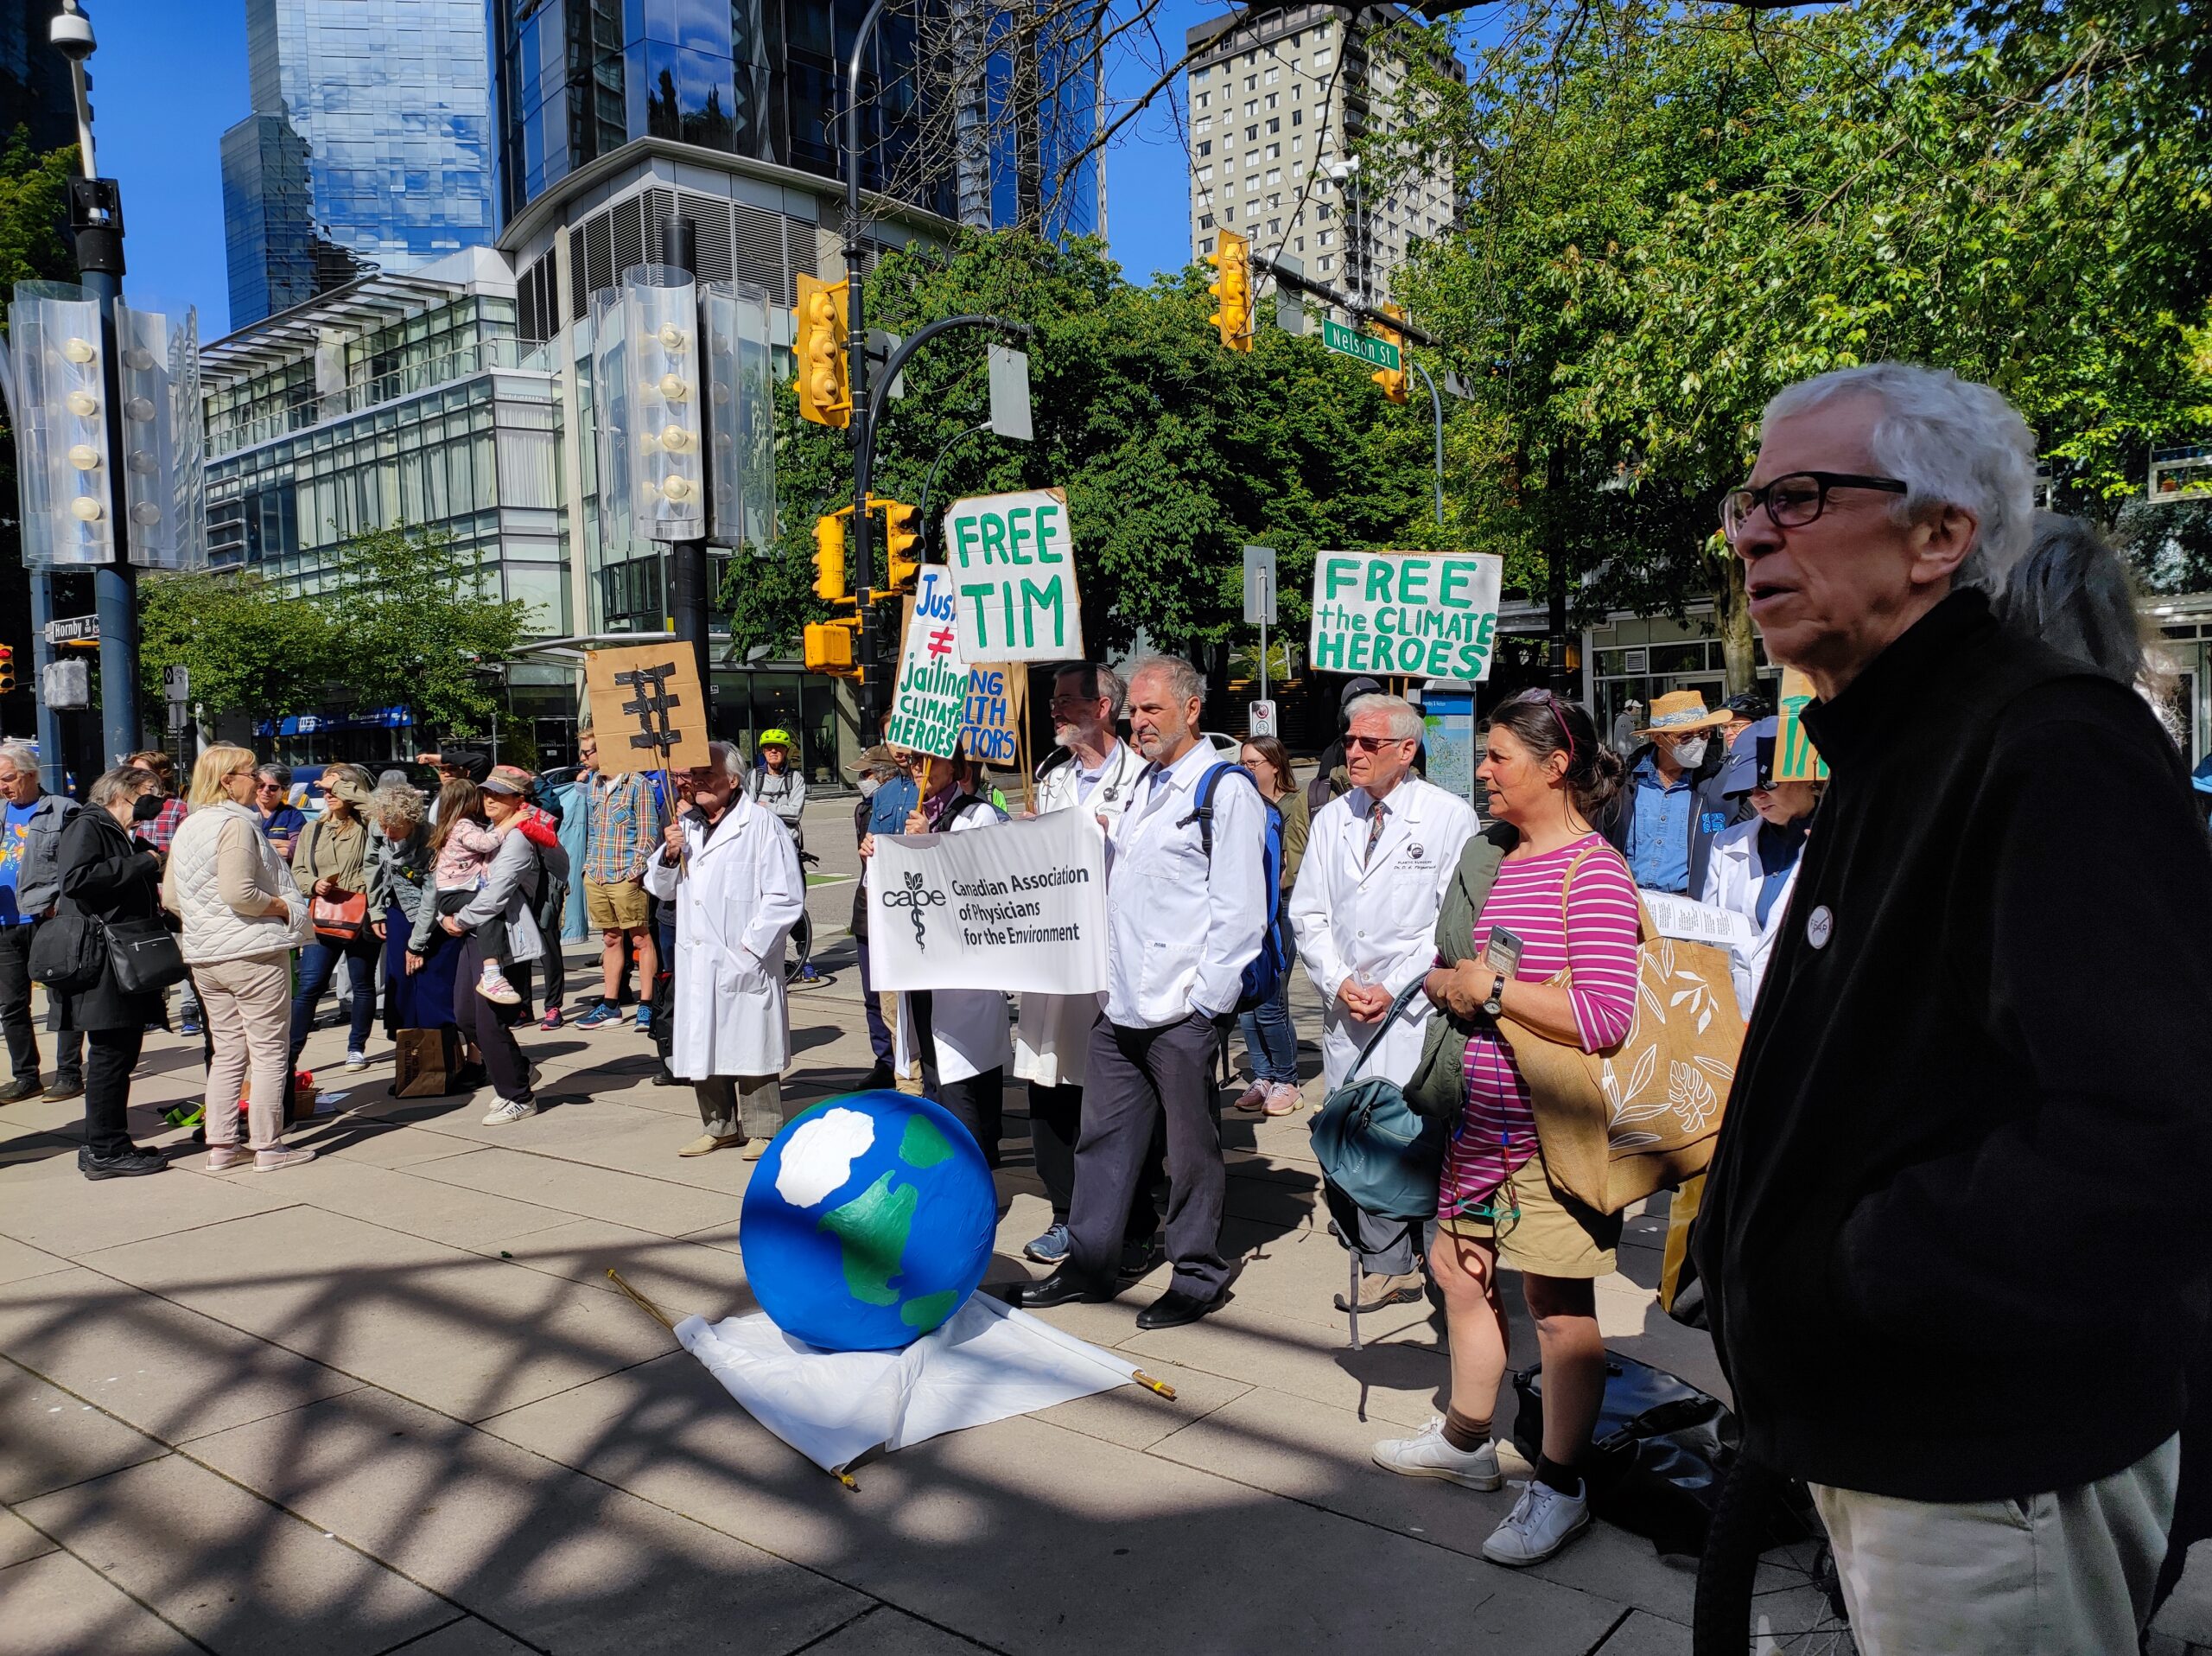 The photo is of a large crowd, gathered outside in Vancouver. They are holding signs that read, “Free Tim” and “Free the climate heroes.” Two people are holding a large banner that says “Canadian Association of Physicians for the Environment.”